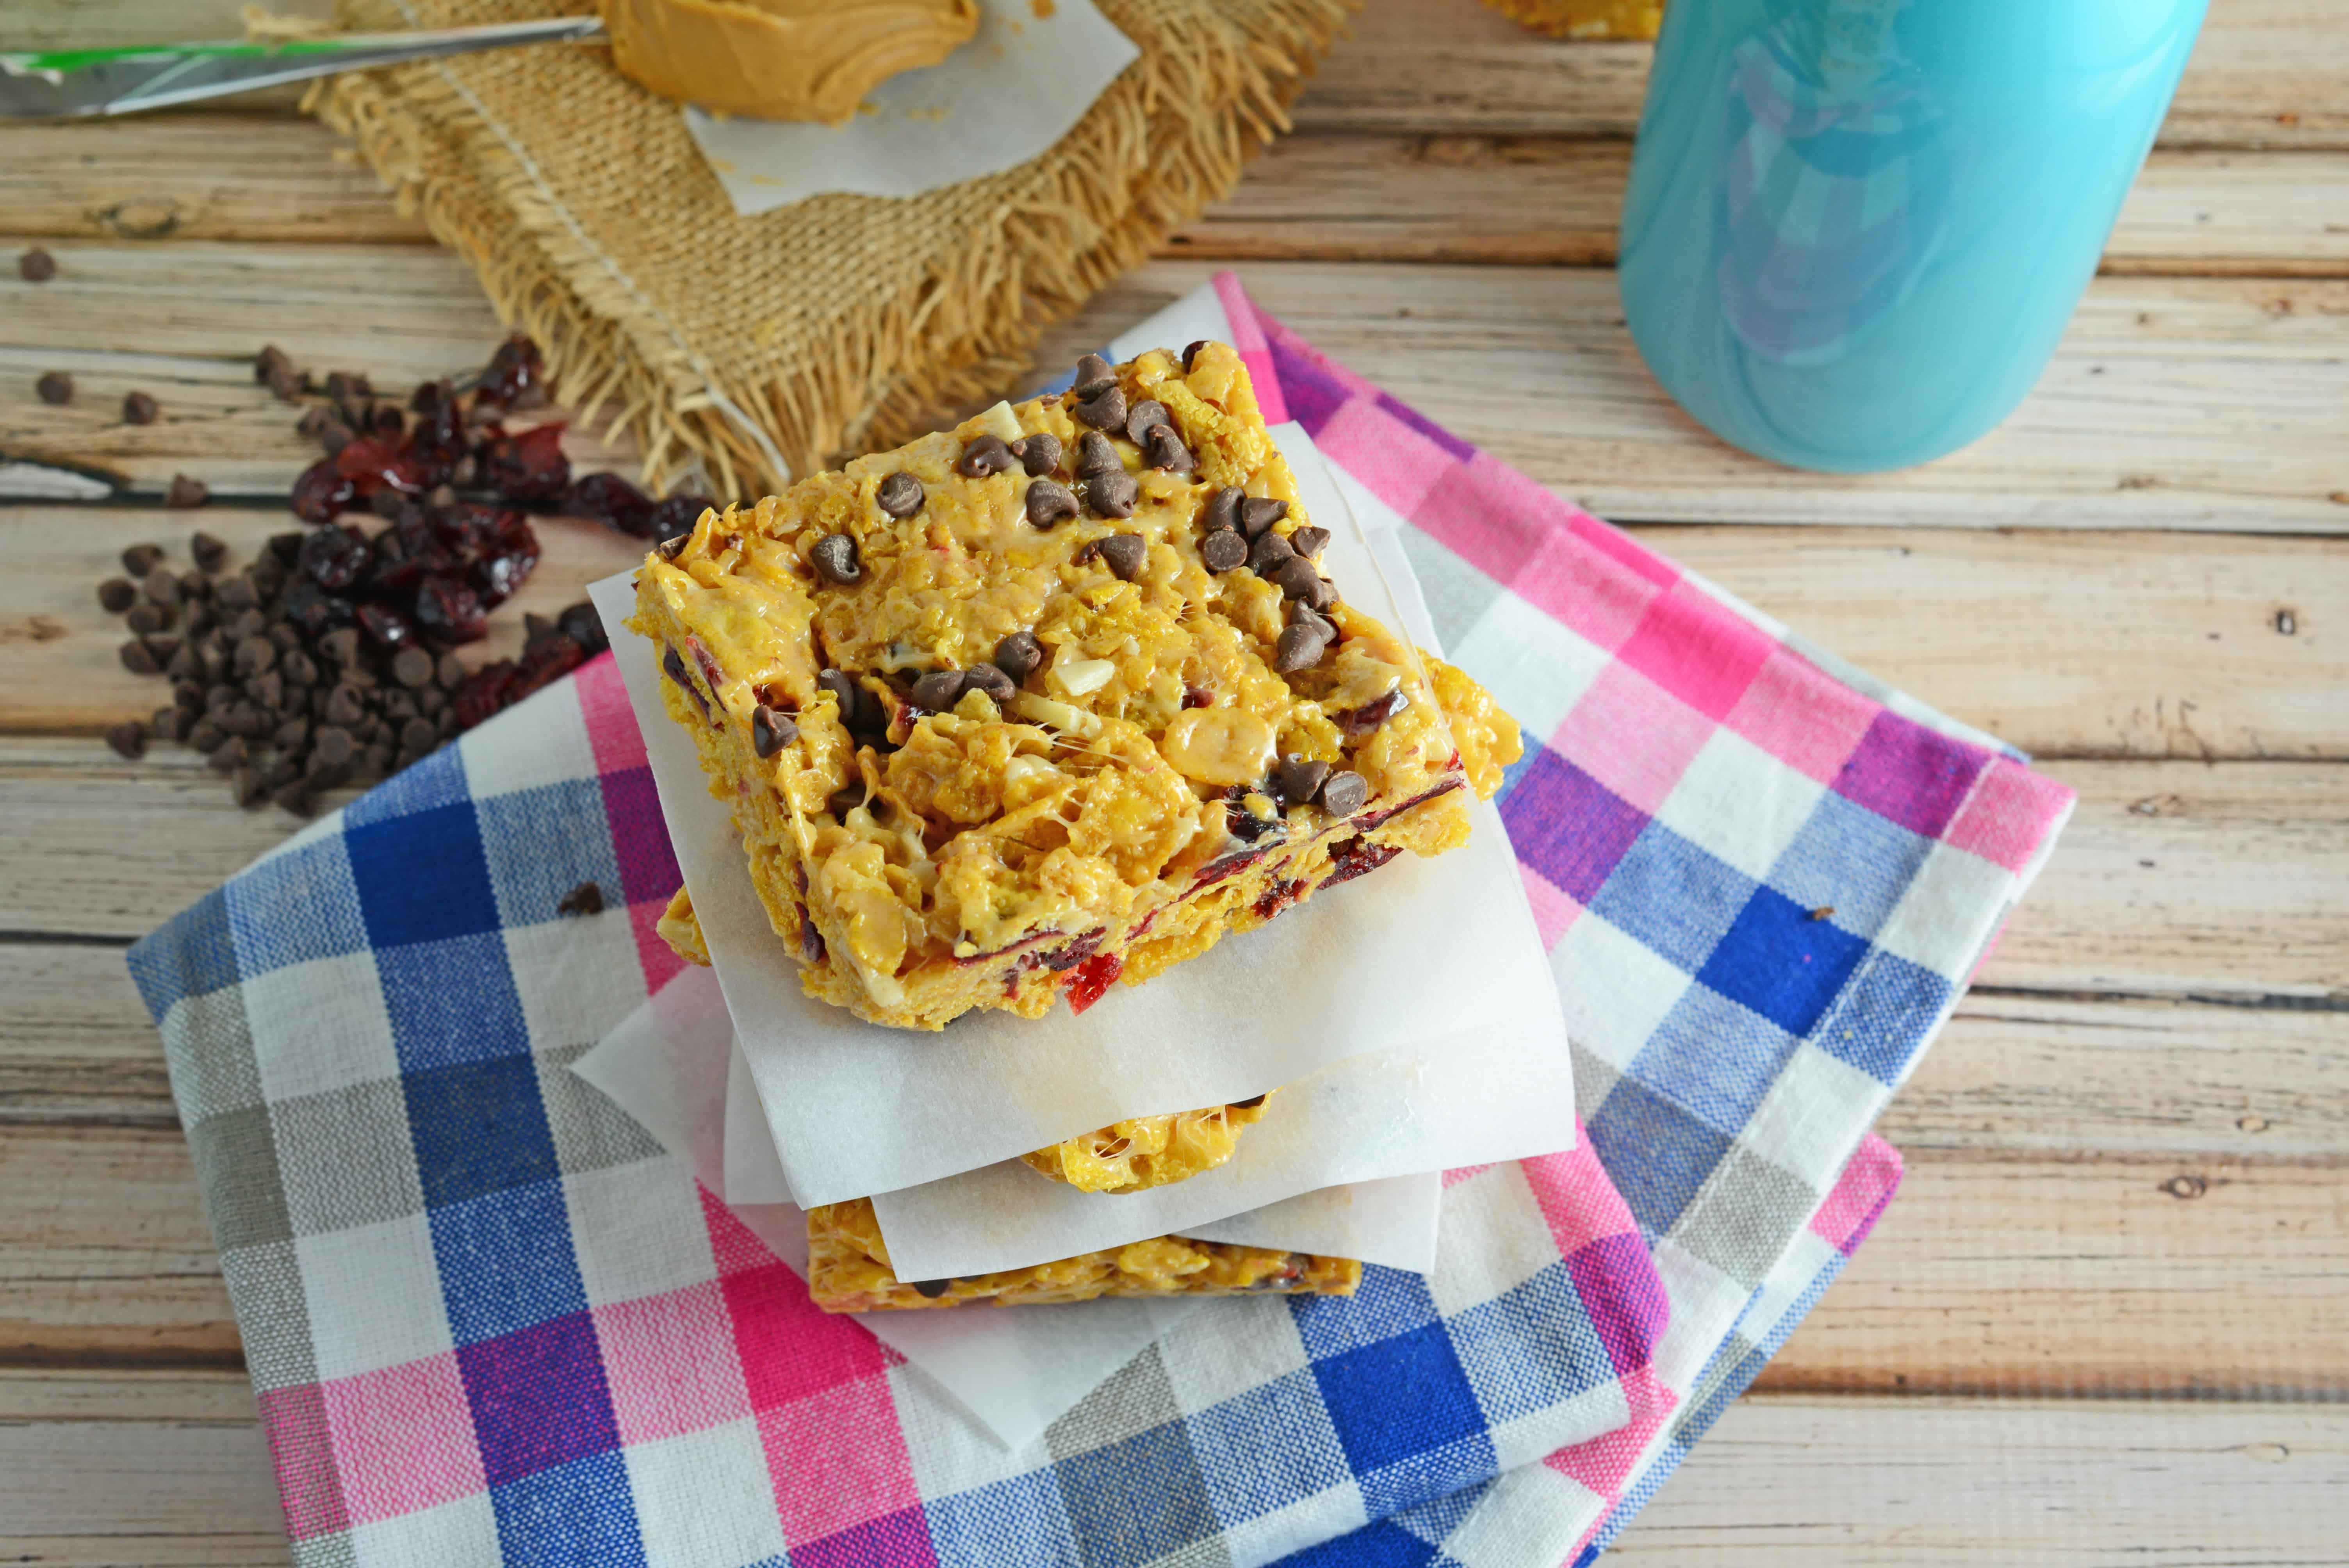 Corn Flake Breakfast Bars Recipe - a sweet and crunchy handheld breakfast bar ready in just 15 minutes made from crunchy corn flakes, dried cranberries, slivered almonds, peanut butter, mini chocolate chips and marshmallows. www.savoryexperiments.com